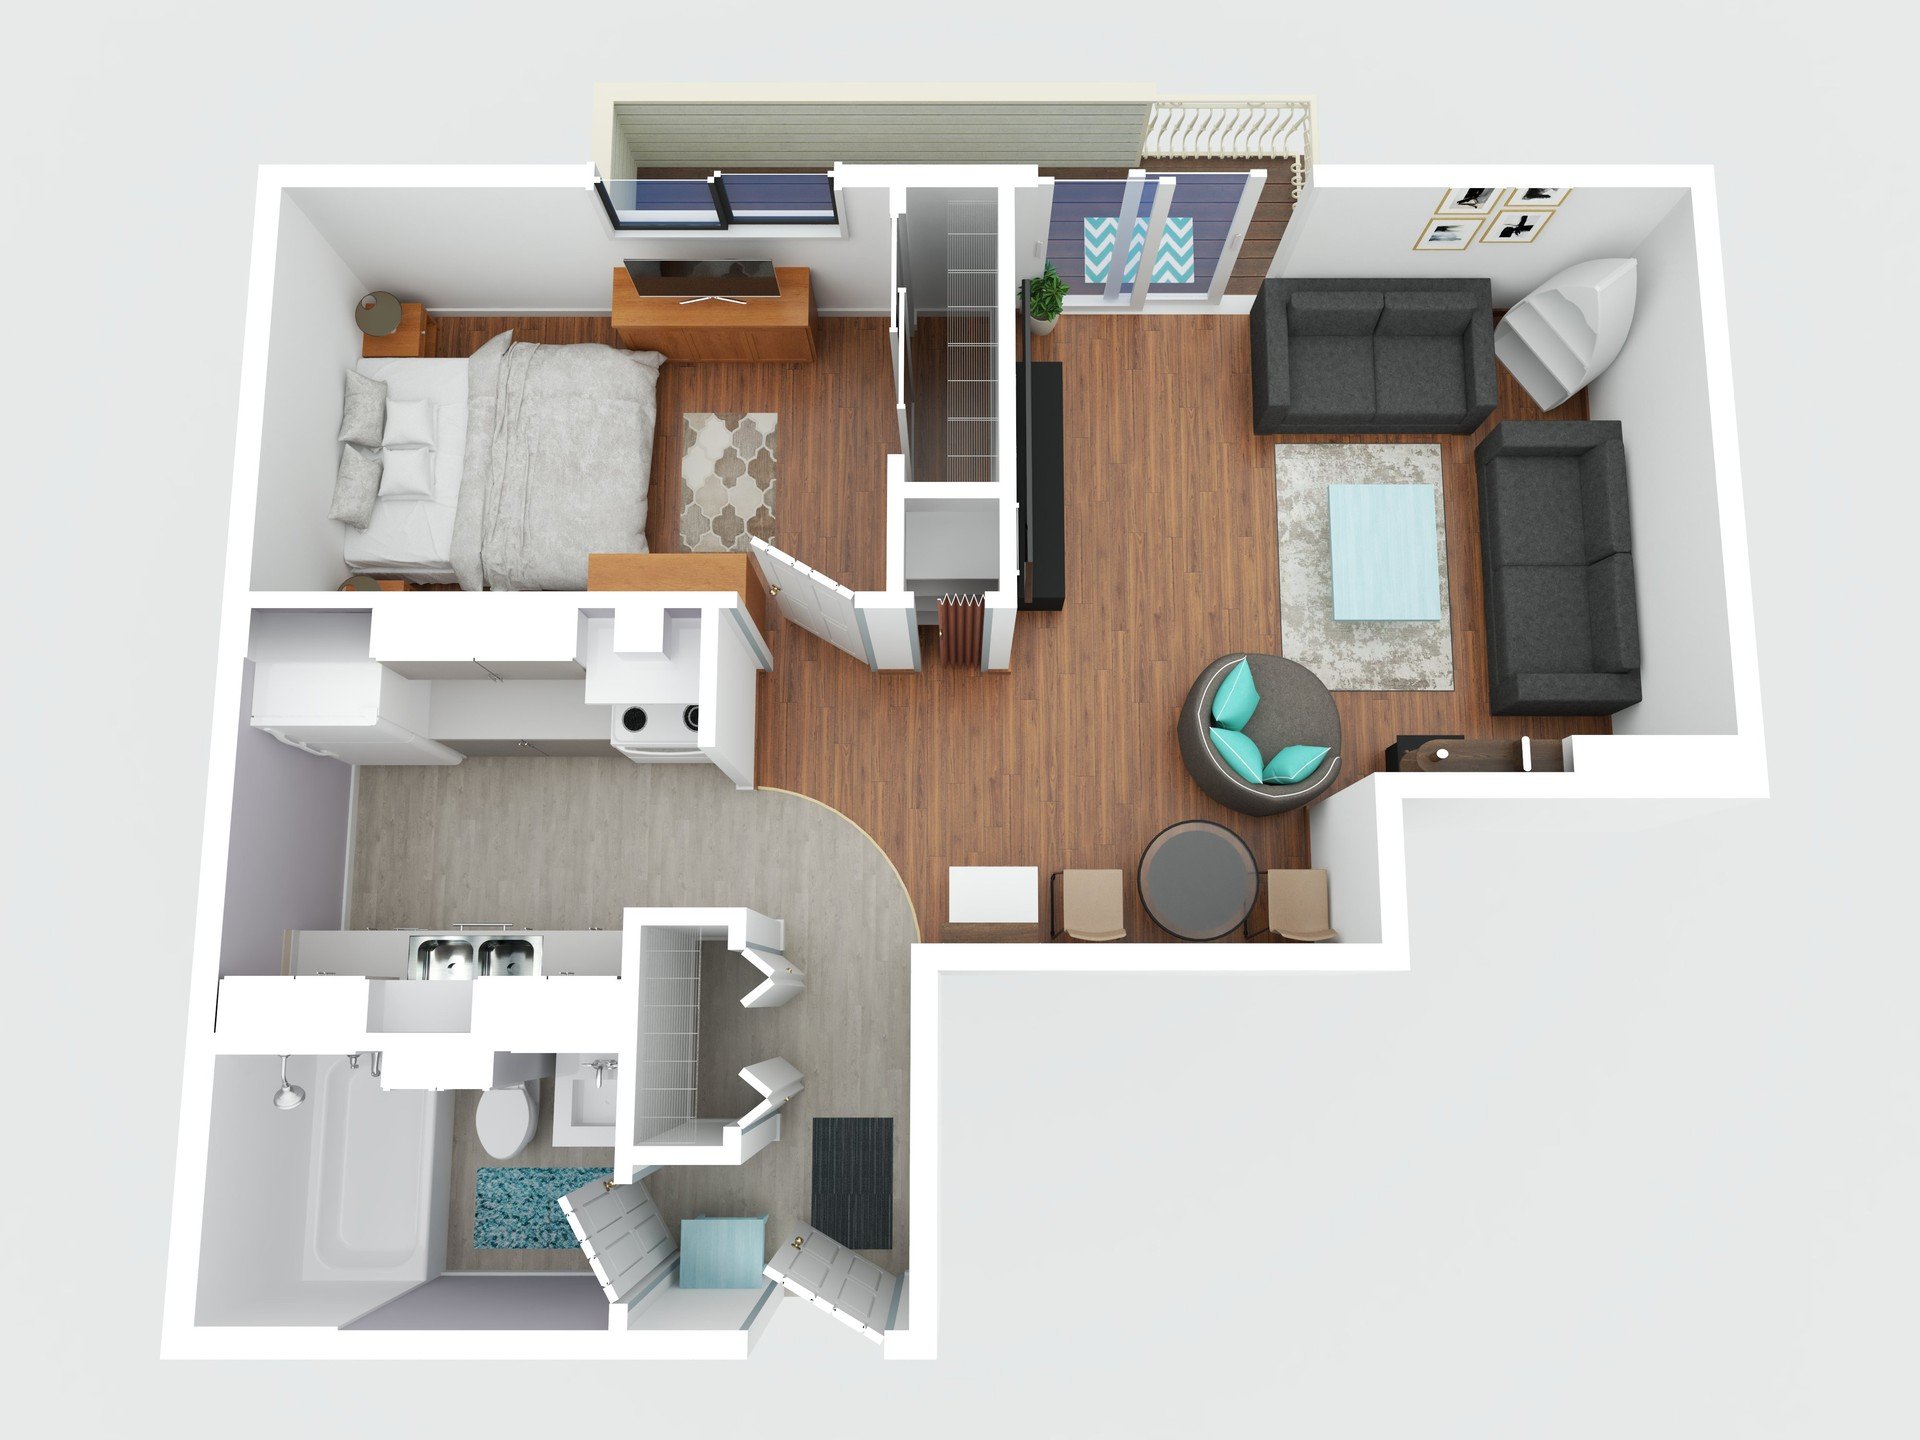 Check this out! Now introducing 3D Floor Plans!